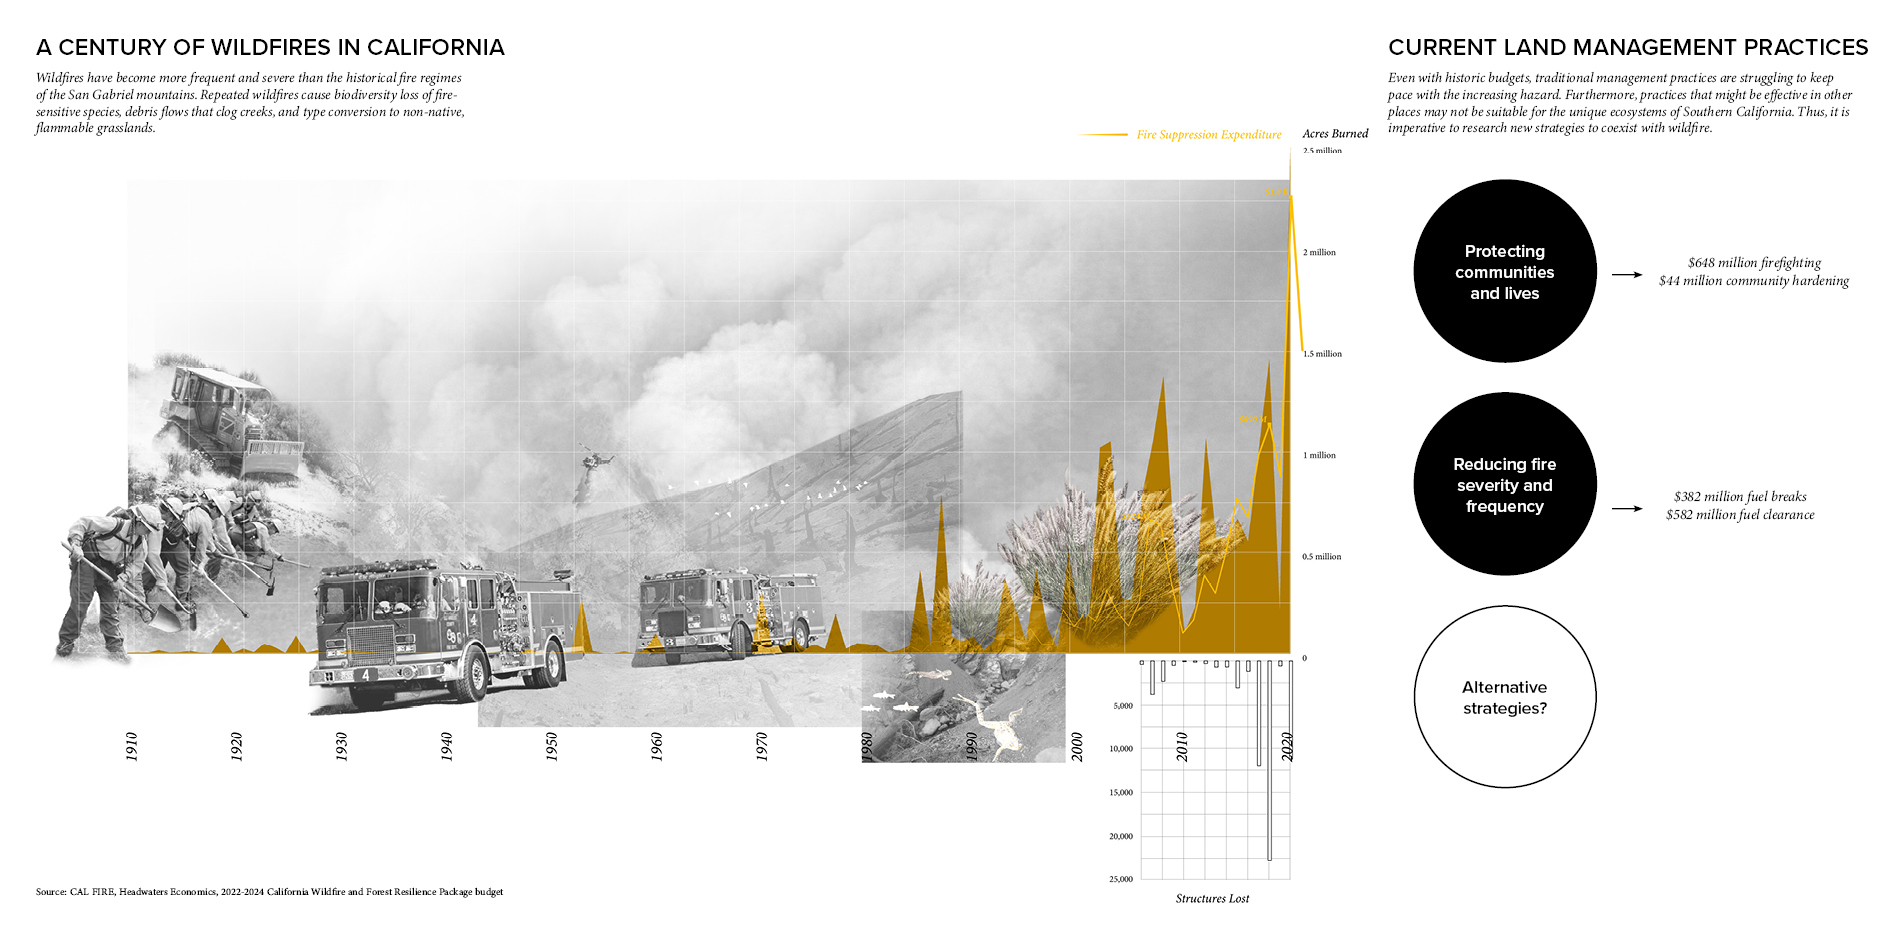 A Century of Wildfires in California